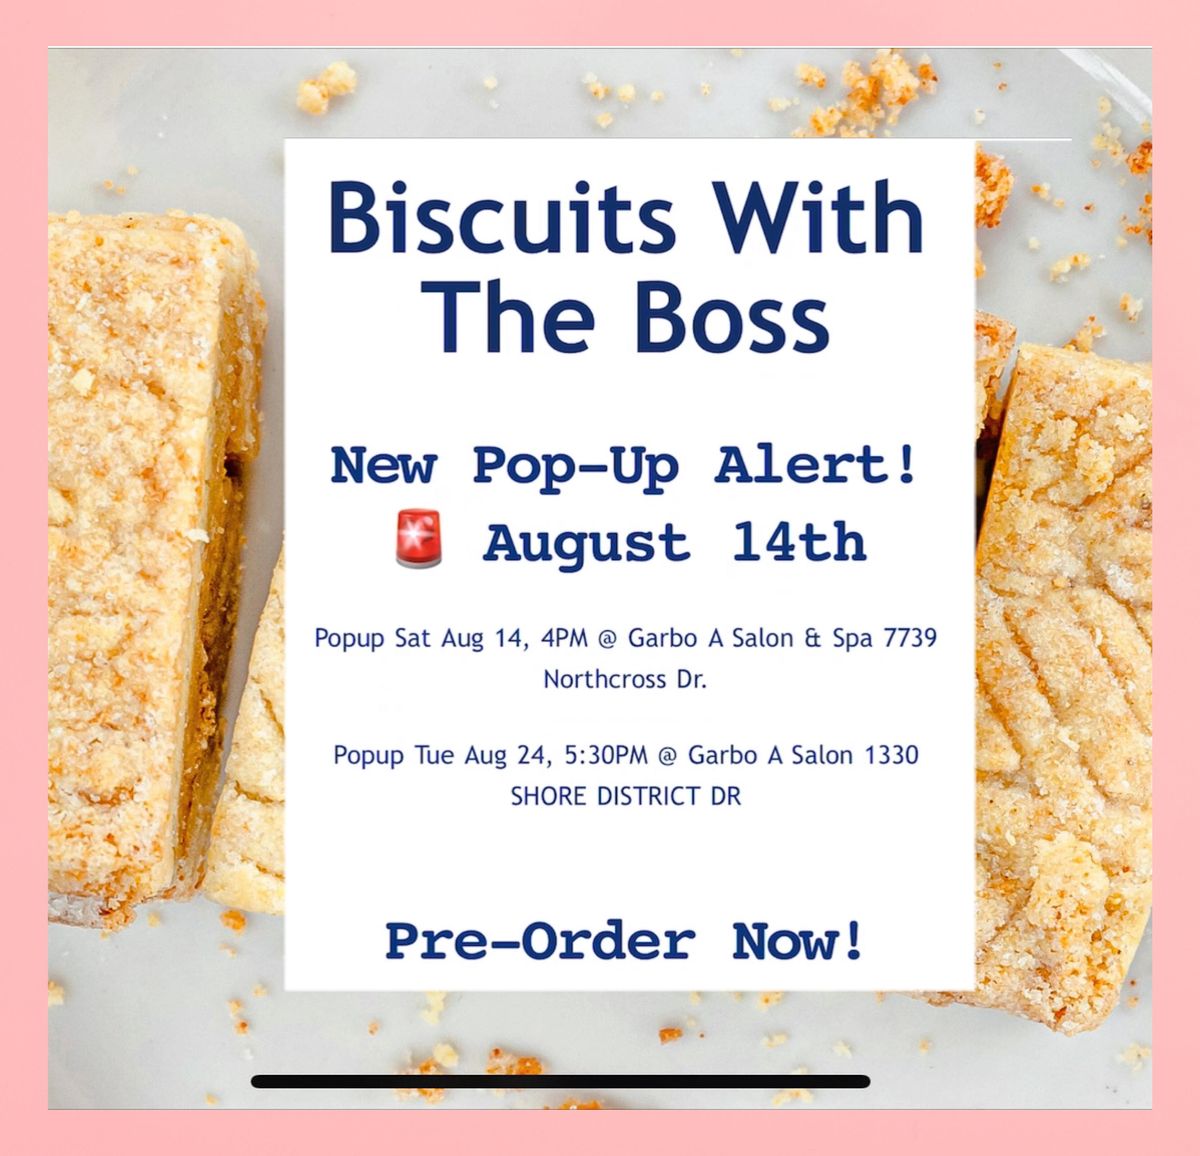 BISCUITS WITH THE BOSS - POP UP EVENT